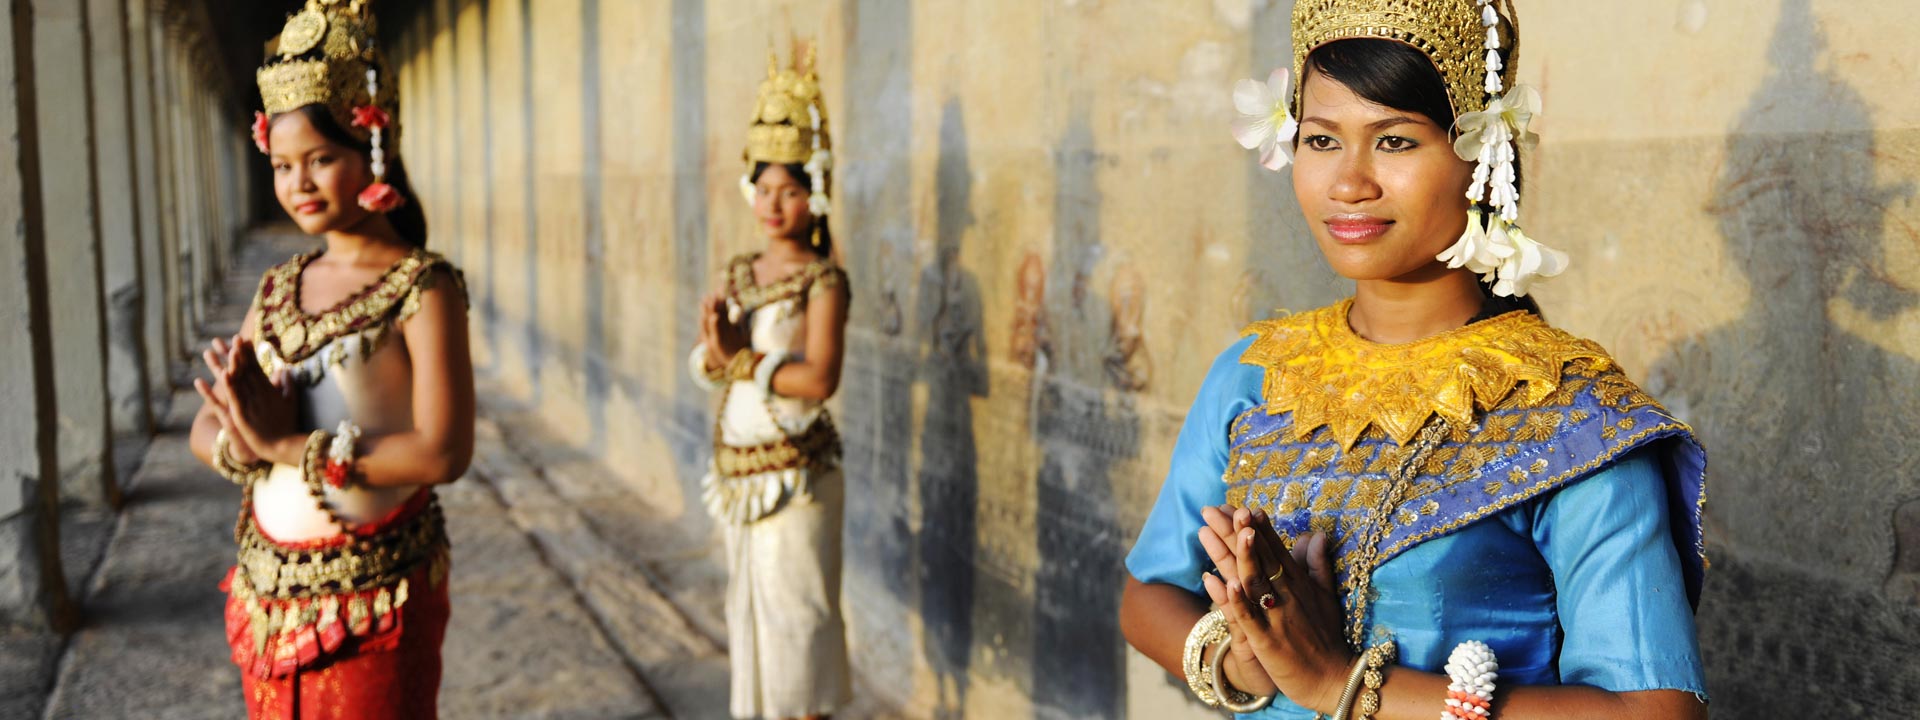 Discover Exotic Lands and Enjoy the Warmth and Comfort of Cambodia’s Beaches 7 days